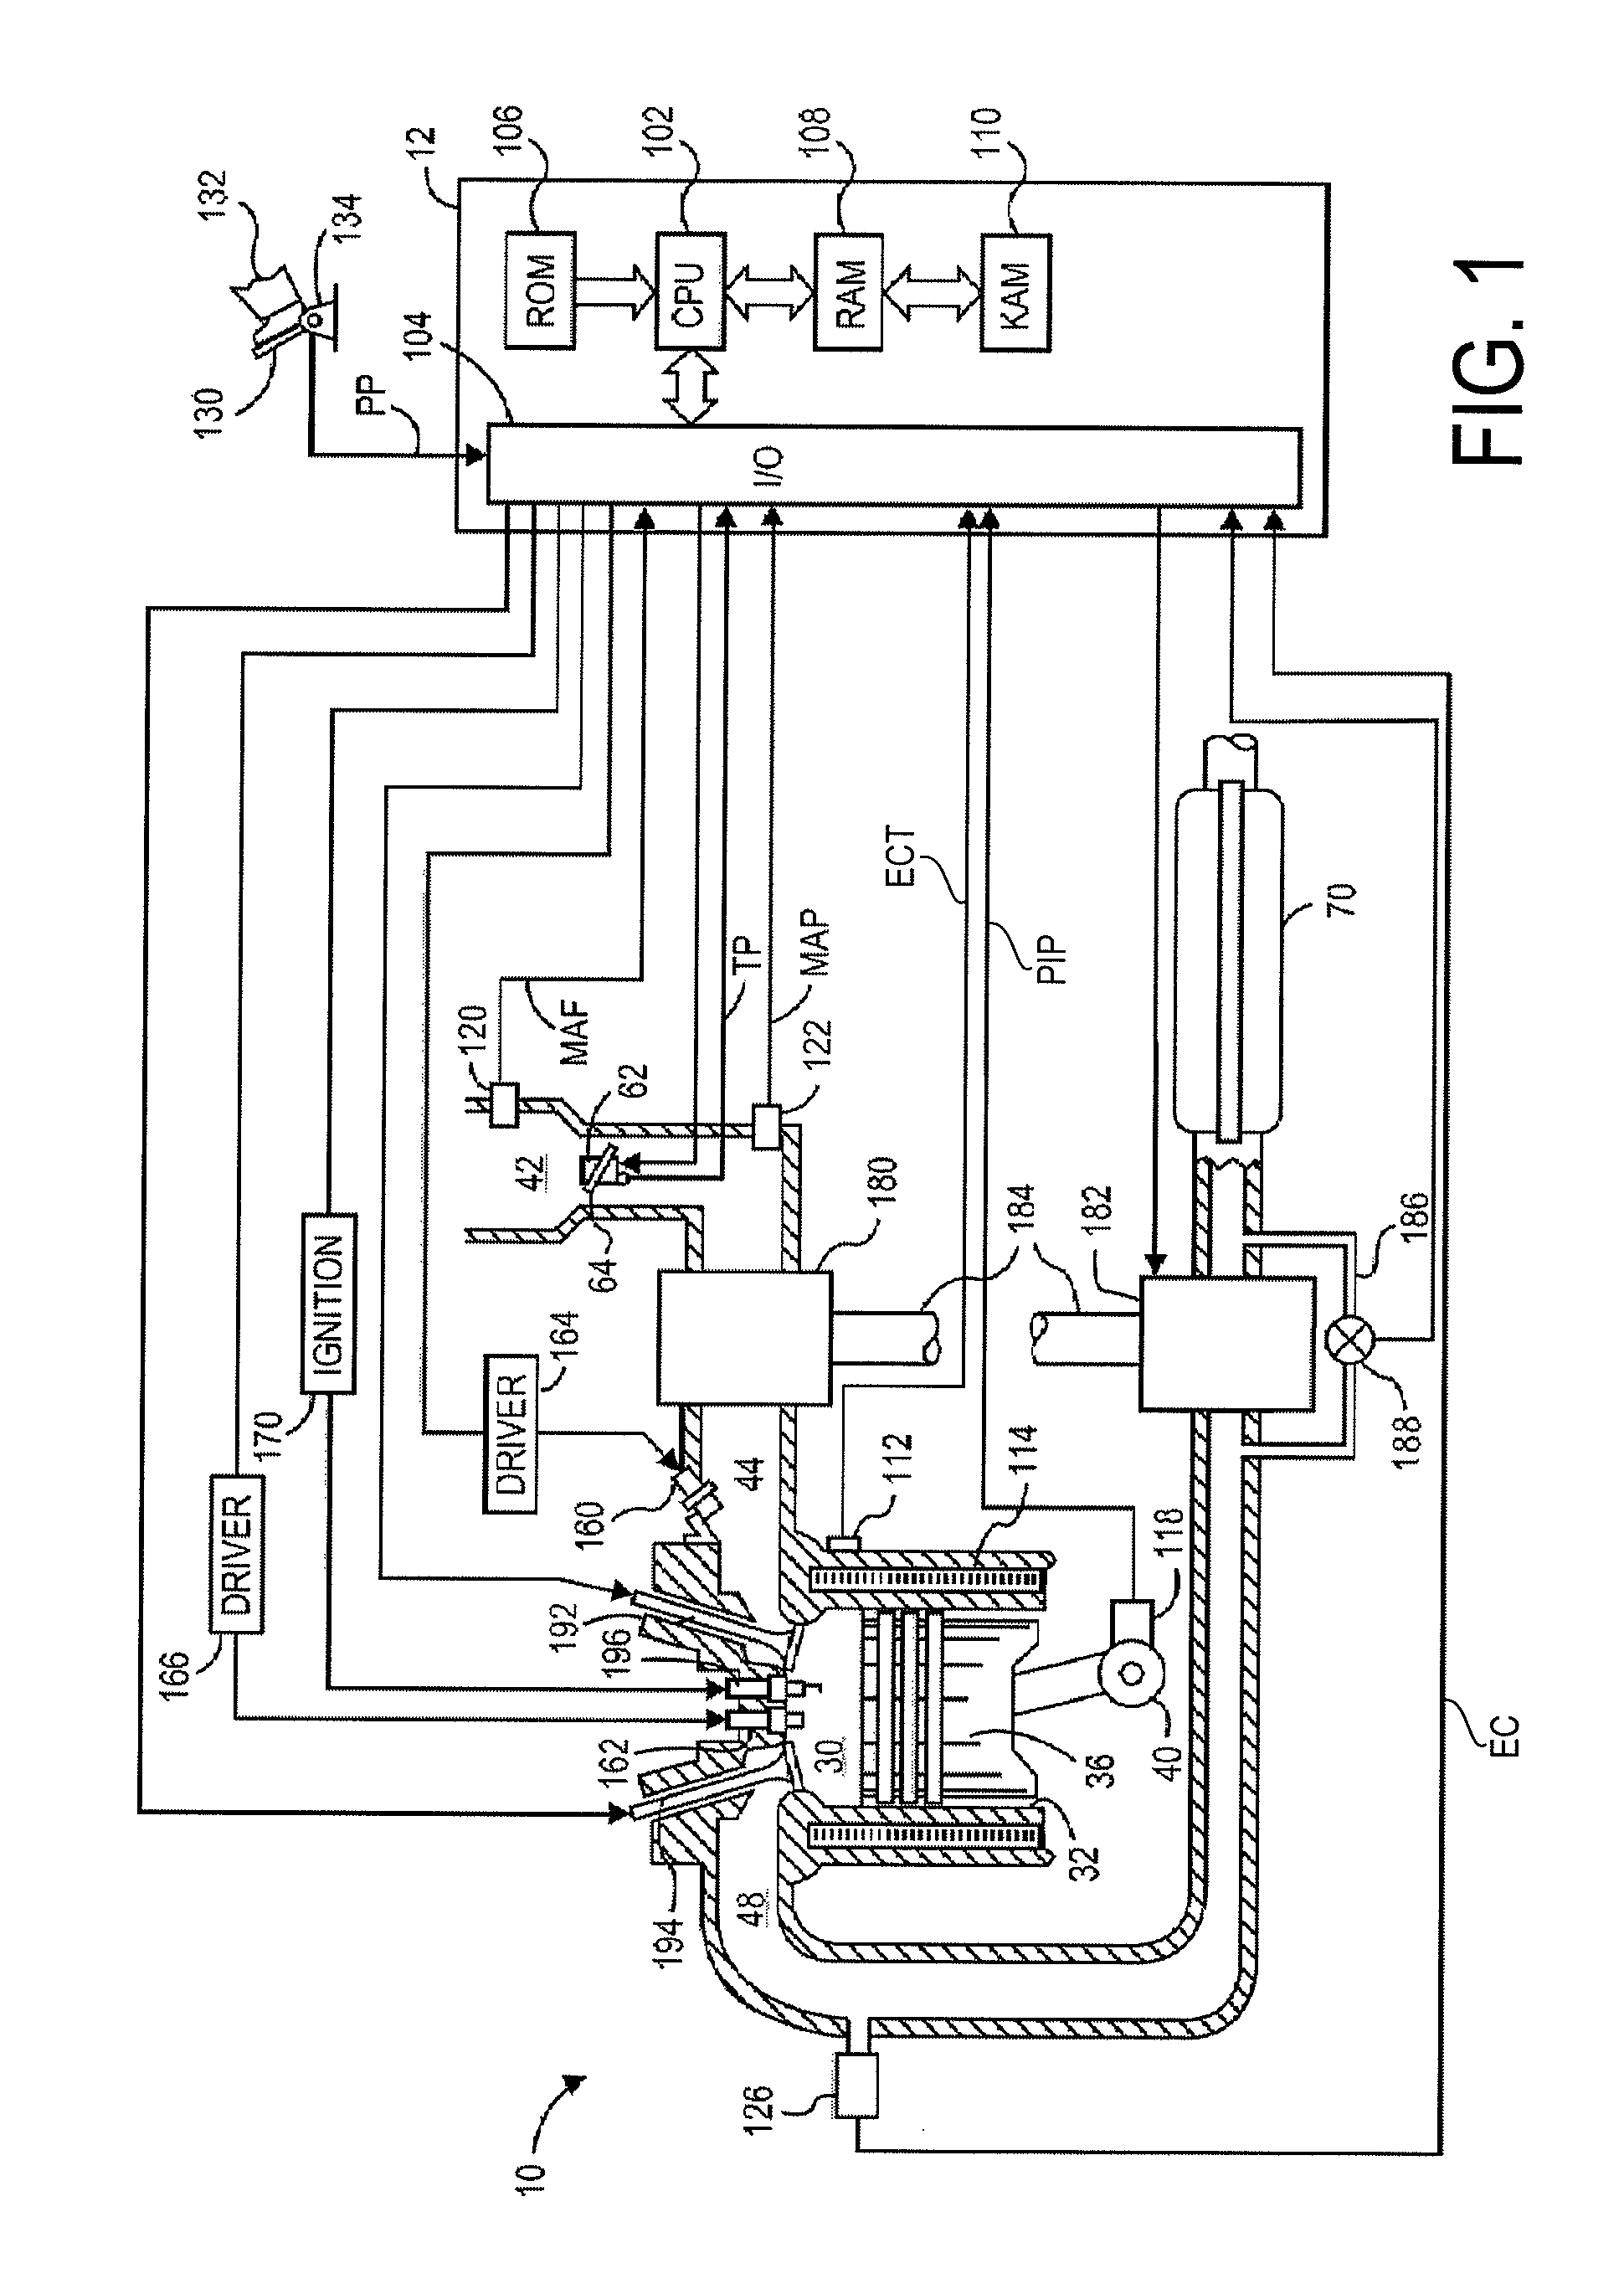 Fuel system for multi-fuel engine